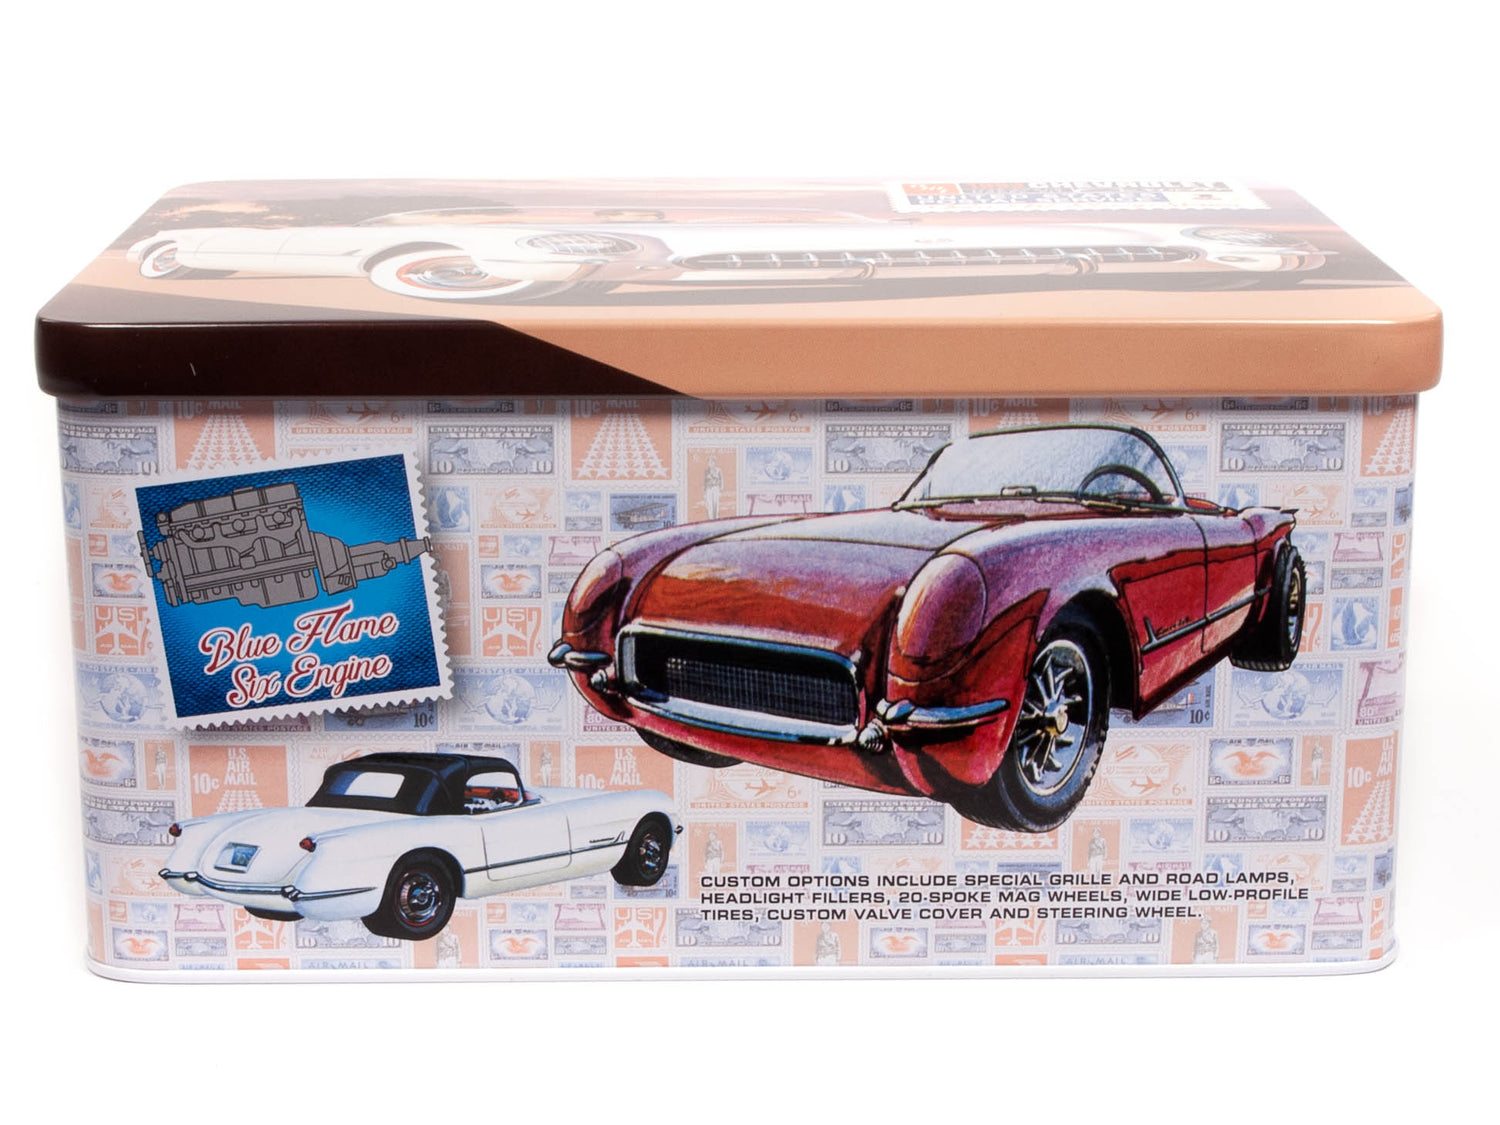 AMT 1953 Chevy Corvette (USPS Stamp Series) 1:25 Scale Model Kit